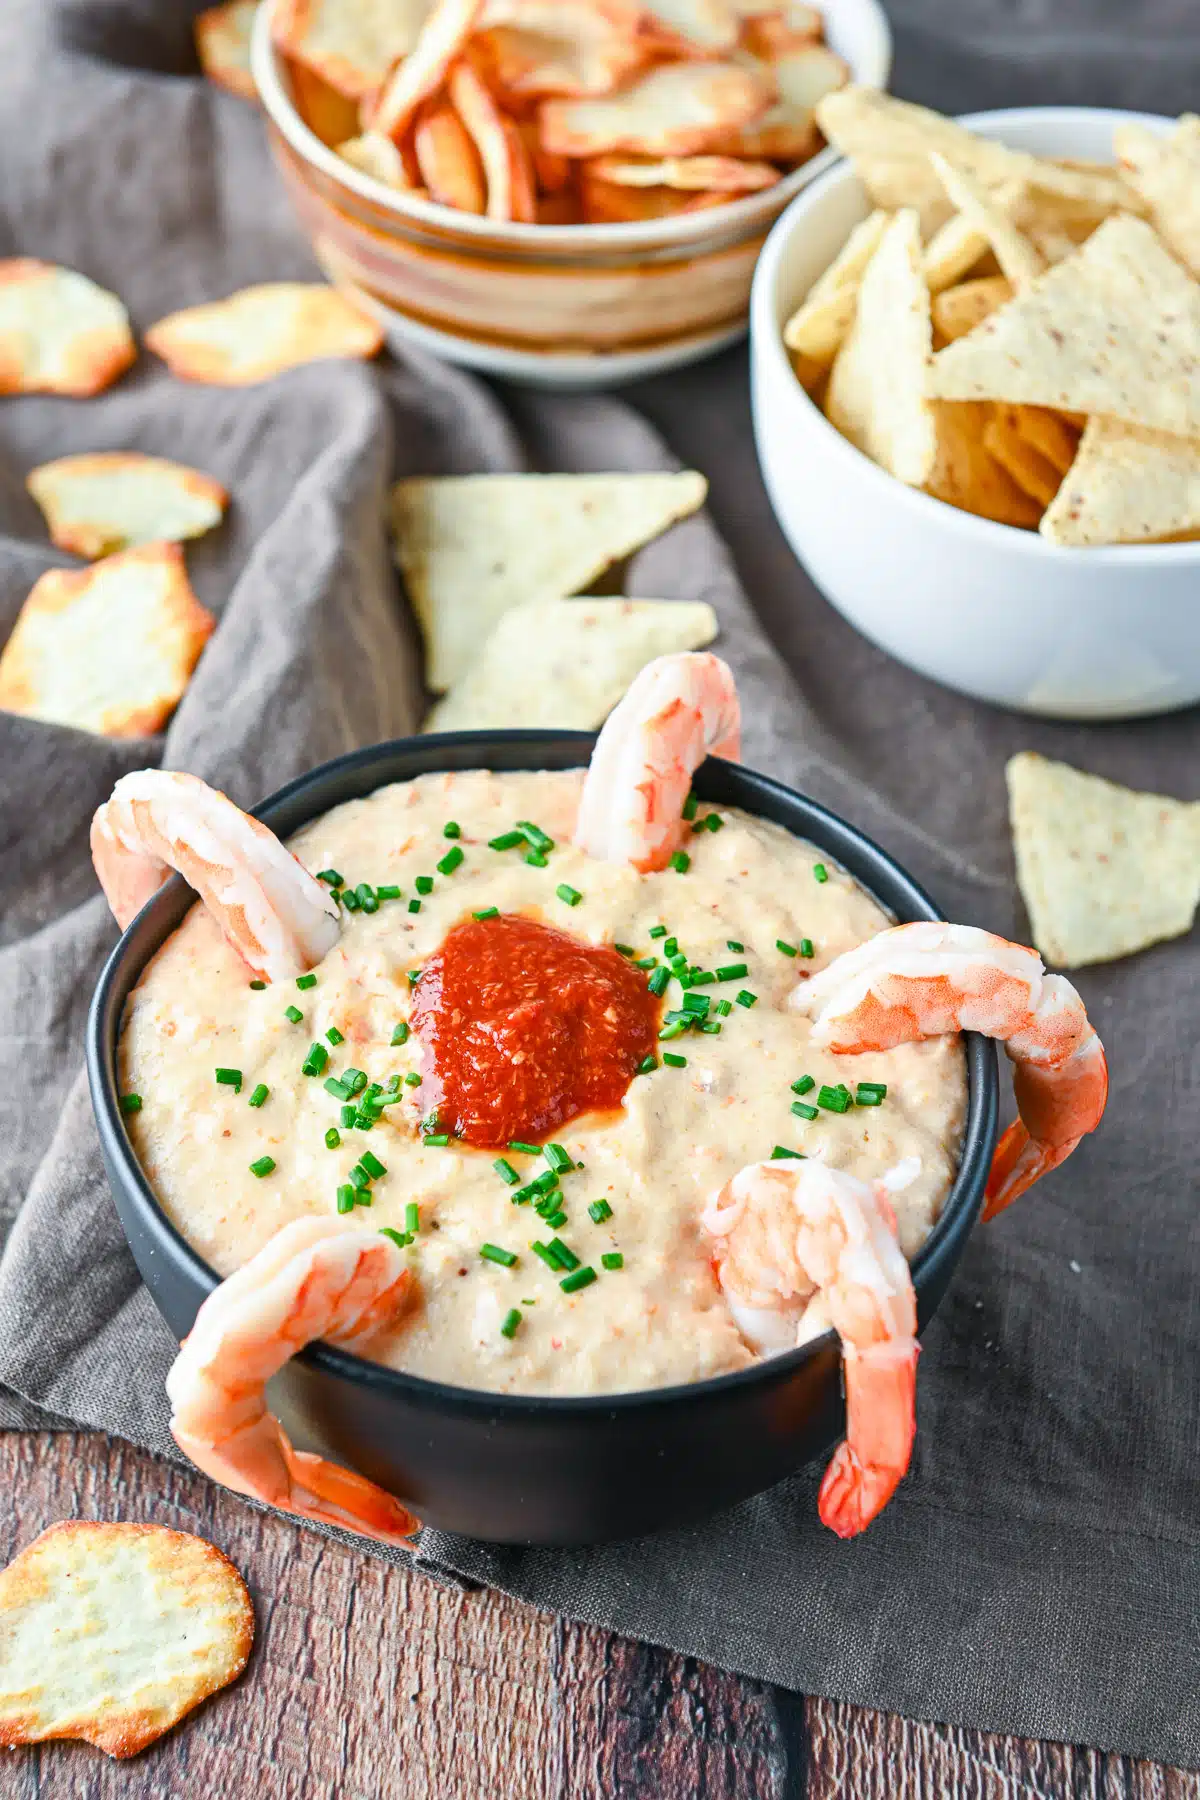 Chips in bowls with some on the table with the shrimp dip in front